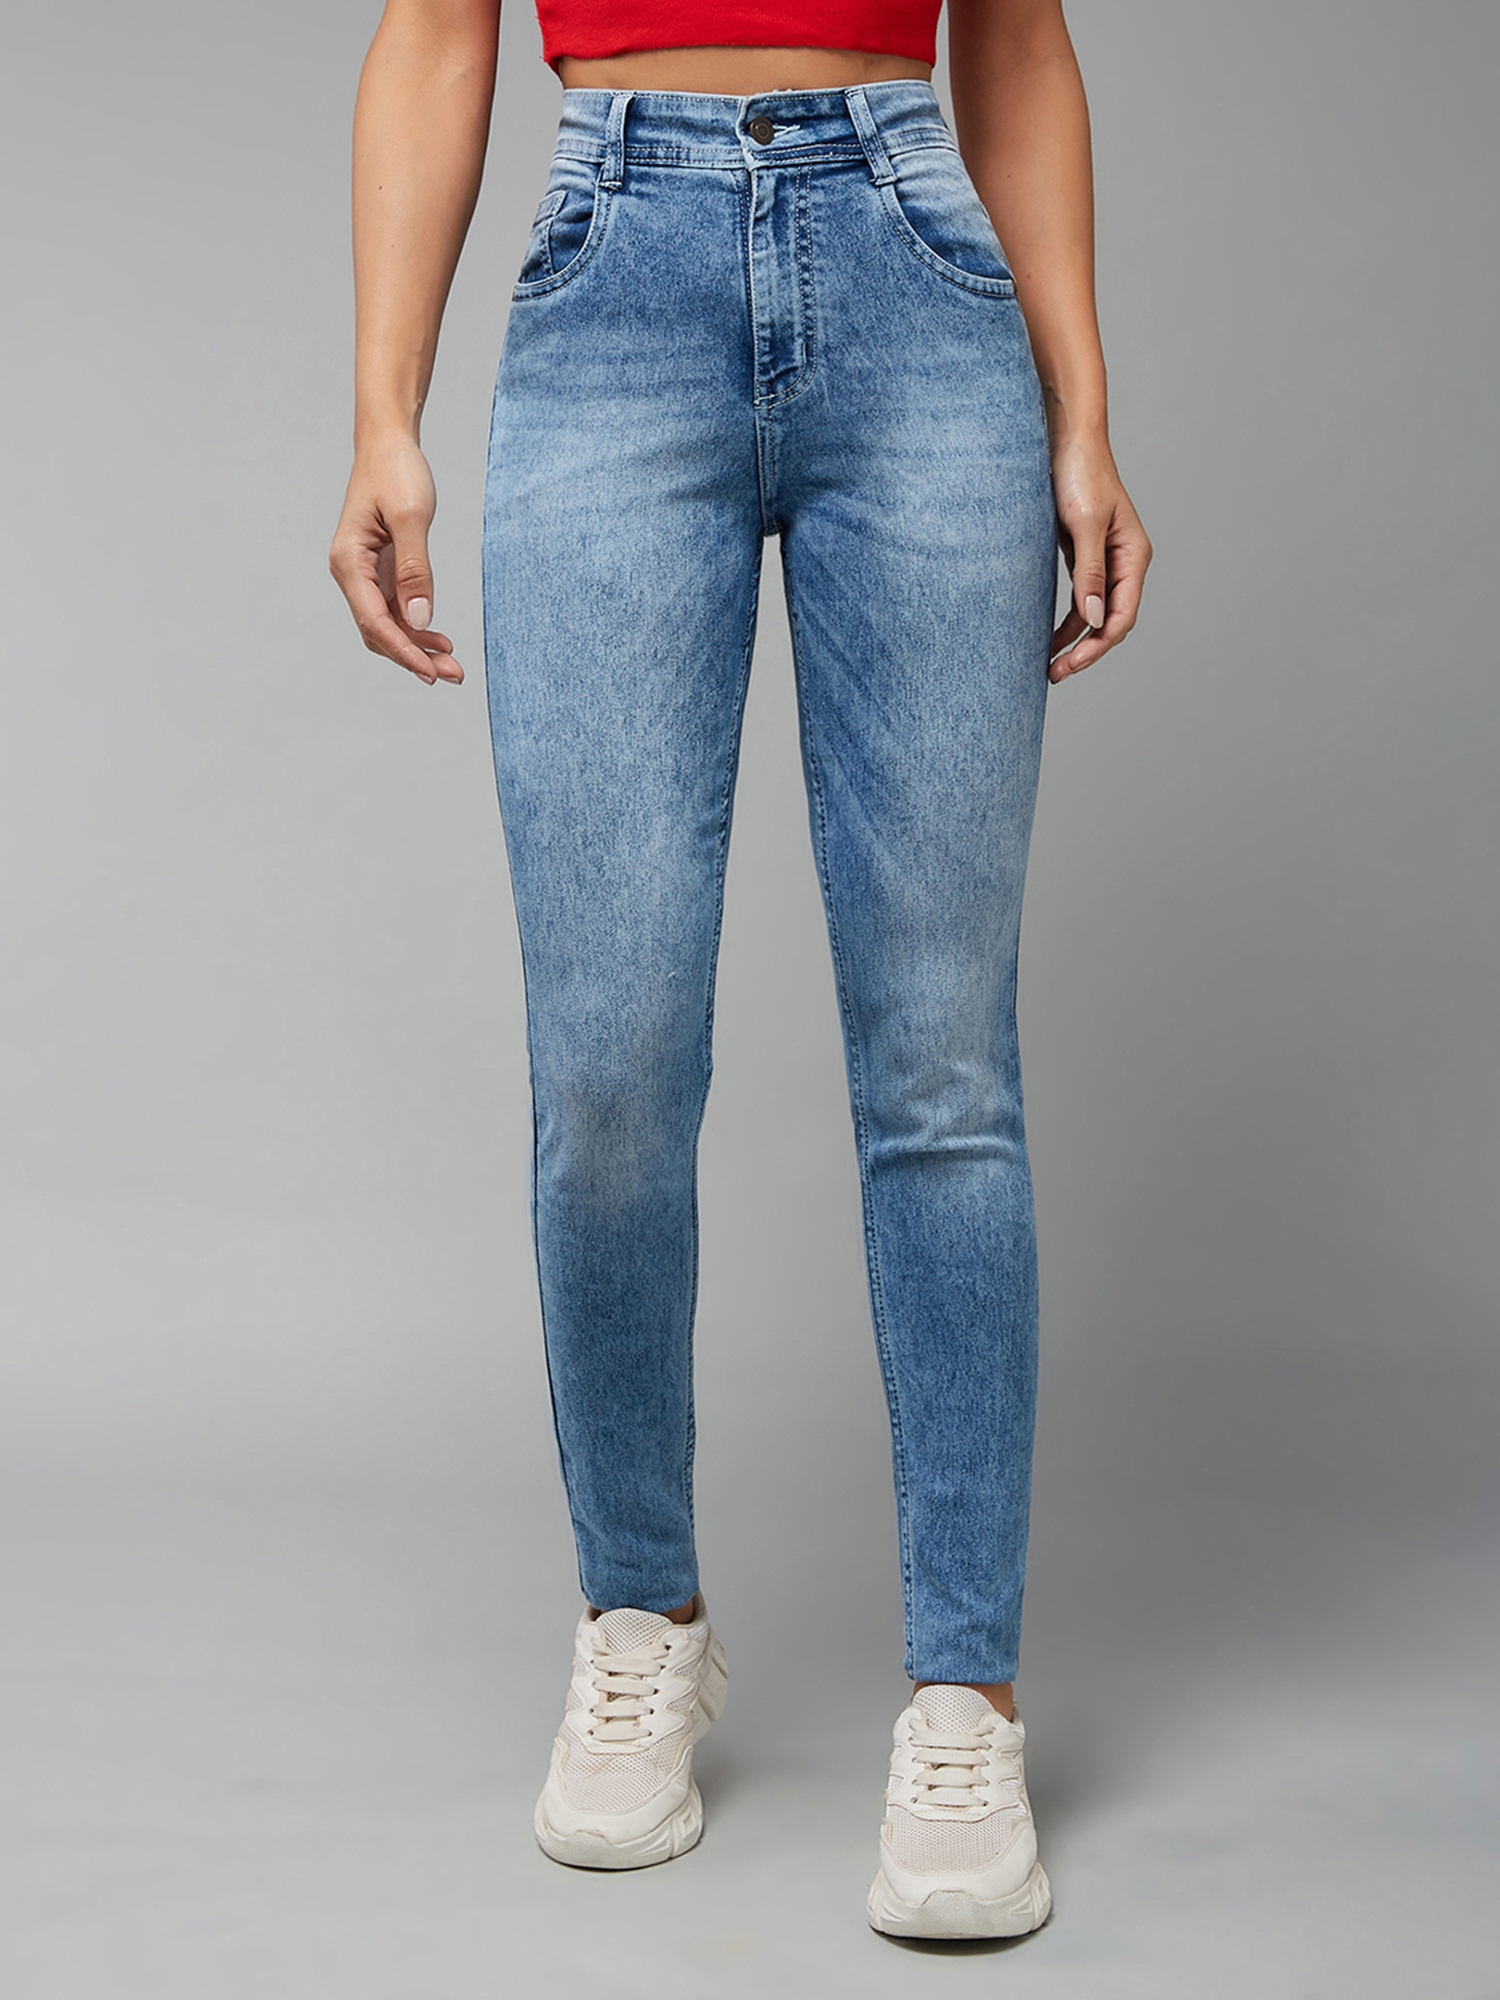 Blue Washed Denim Jeans for Woman in Denim